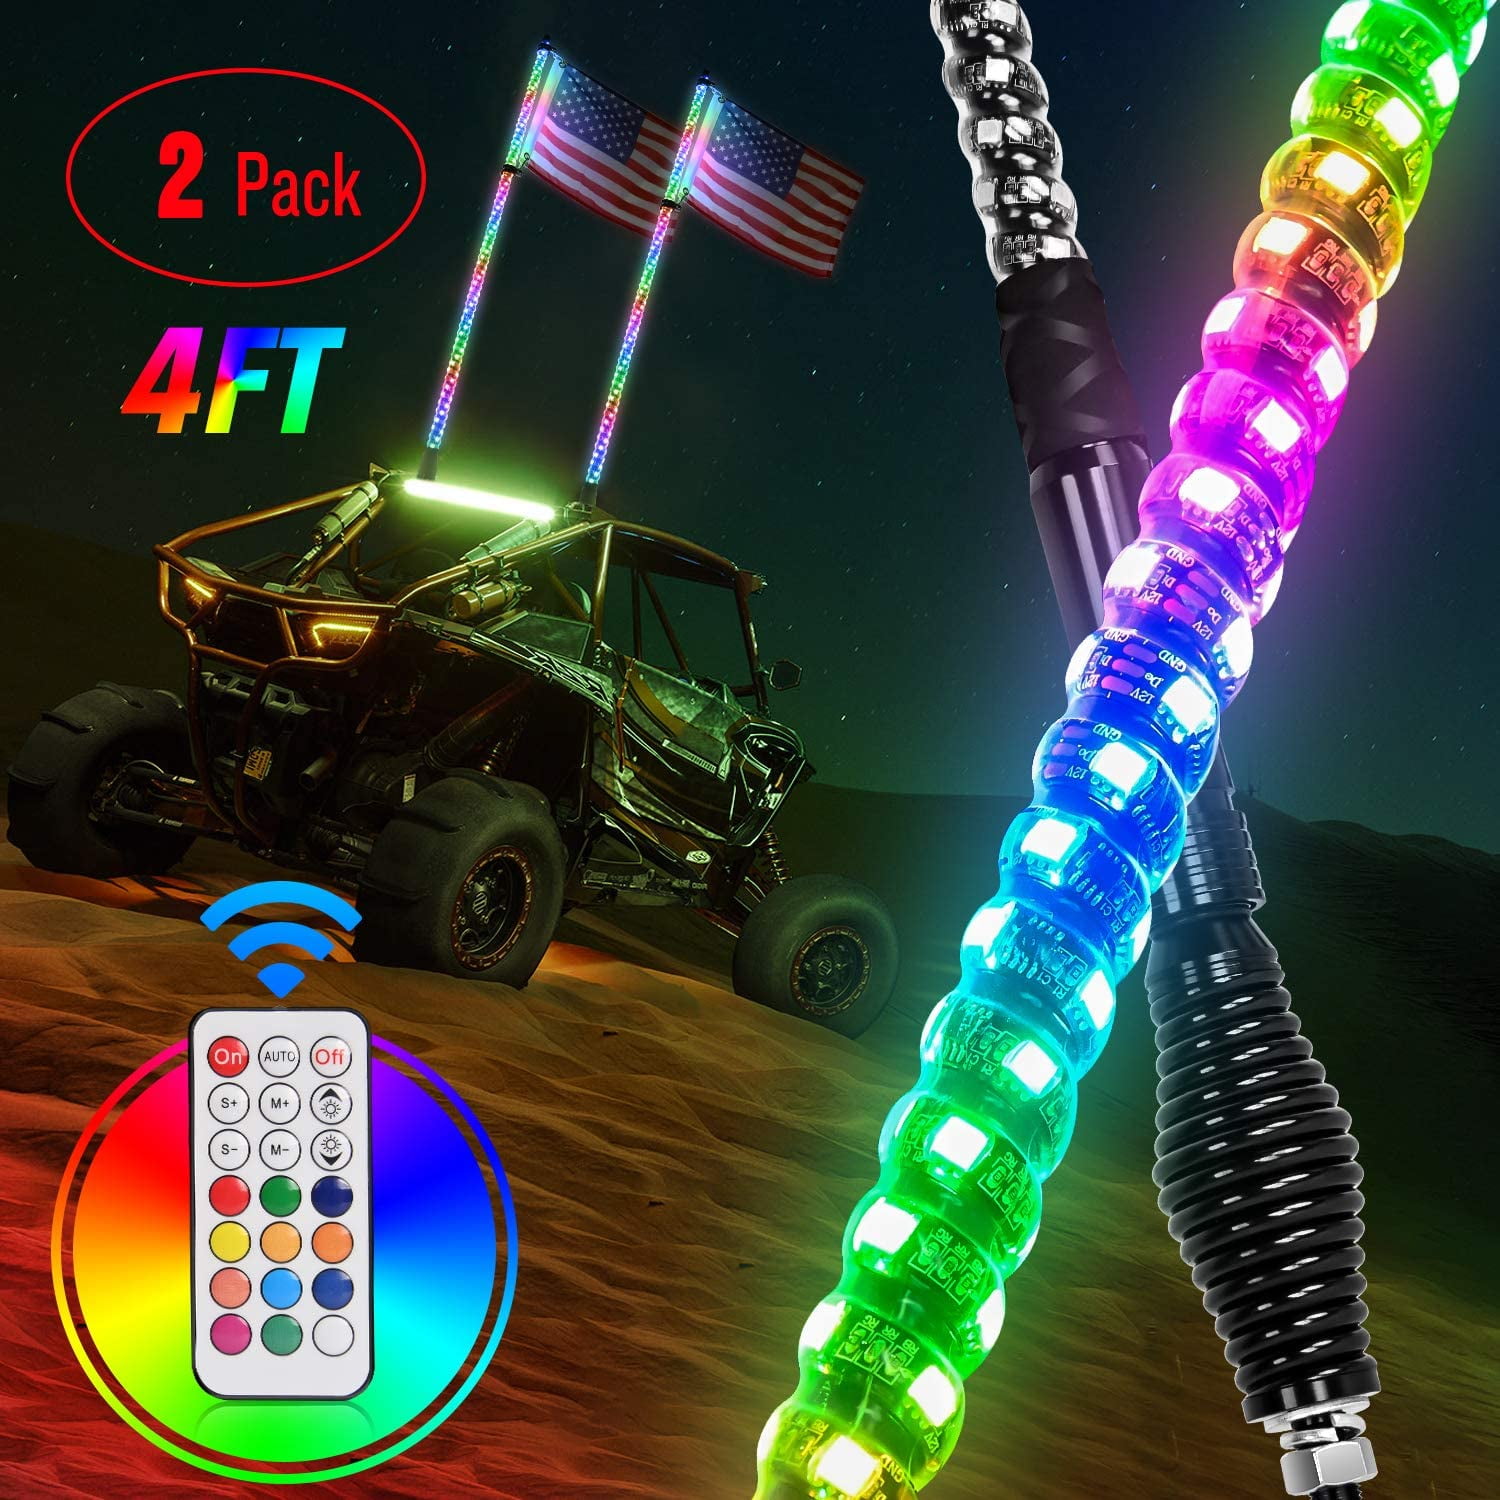 2PCS 4FT Spiral RGB Led Whip Light with Remote Control,22 Dynamic Modes,10 Levels of Speed Adjustment,5 Brightness Levels,Waterproof IP65 for Can-Am ATV UTV RZR Polaris Dune Buggy Offroad Truck 